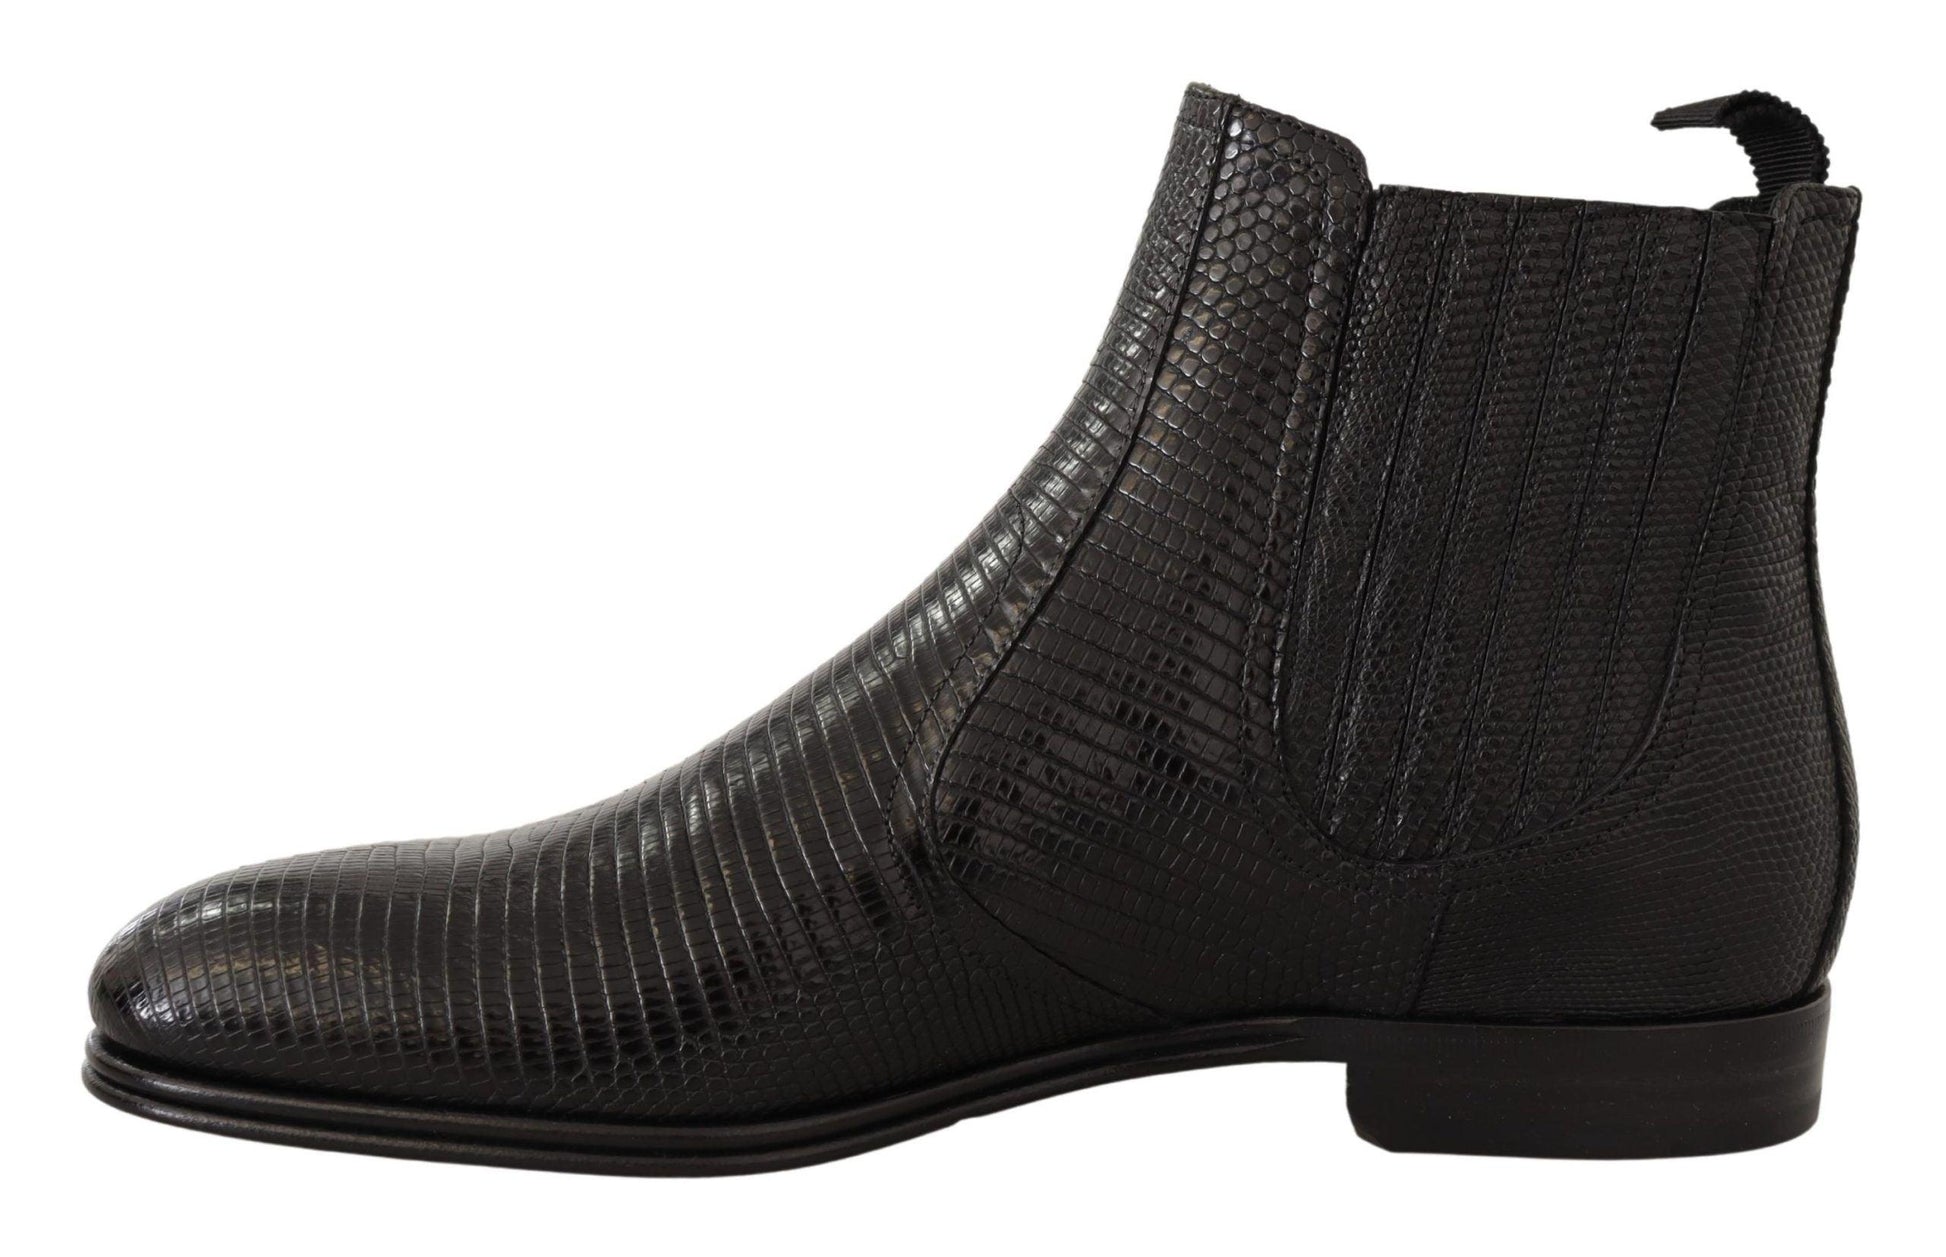 Black Leather Lizard Skin Ankle Boots - Designed by Dolce & Gabbana Available to Buy at a Discounted Price on Moon Behind The Hill Online Designer Discount Store